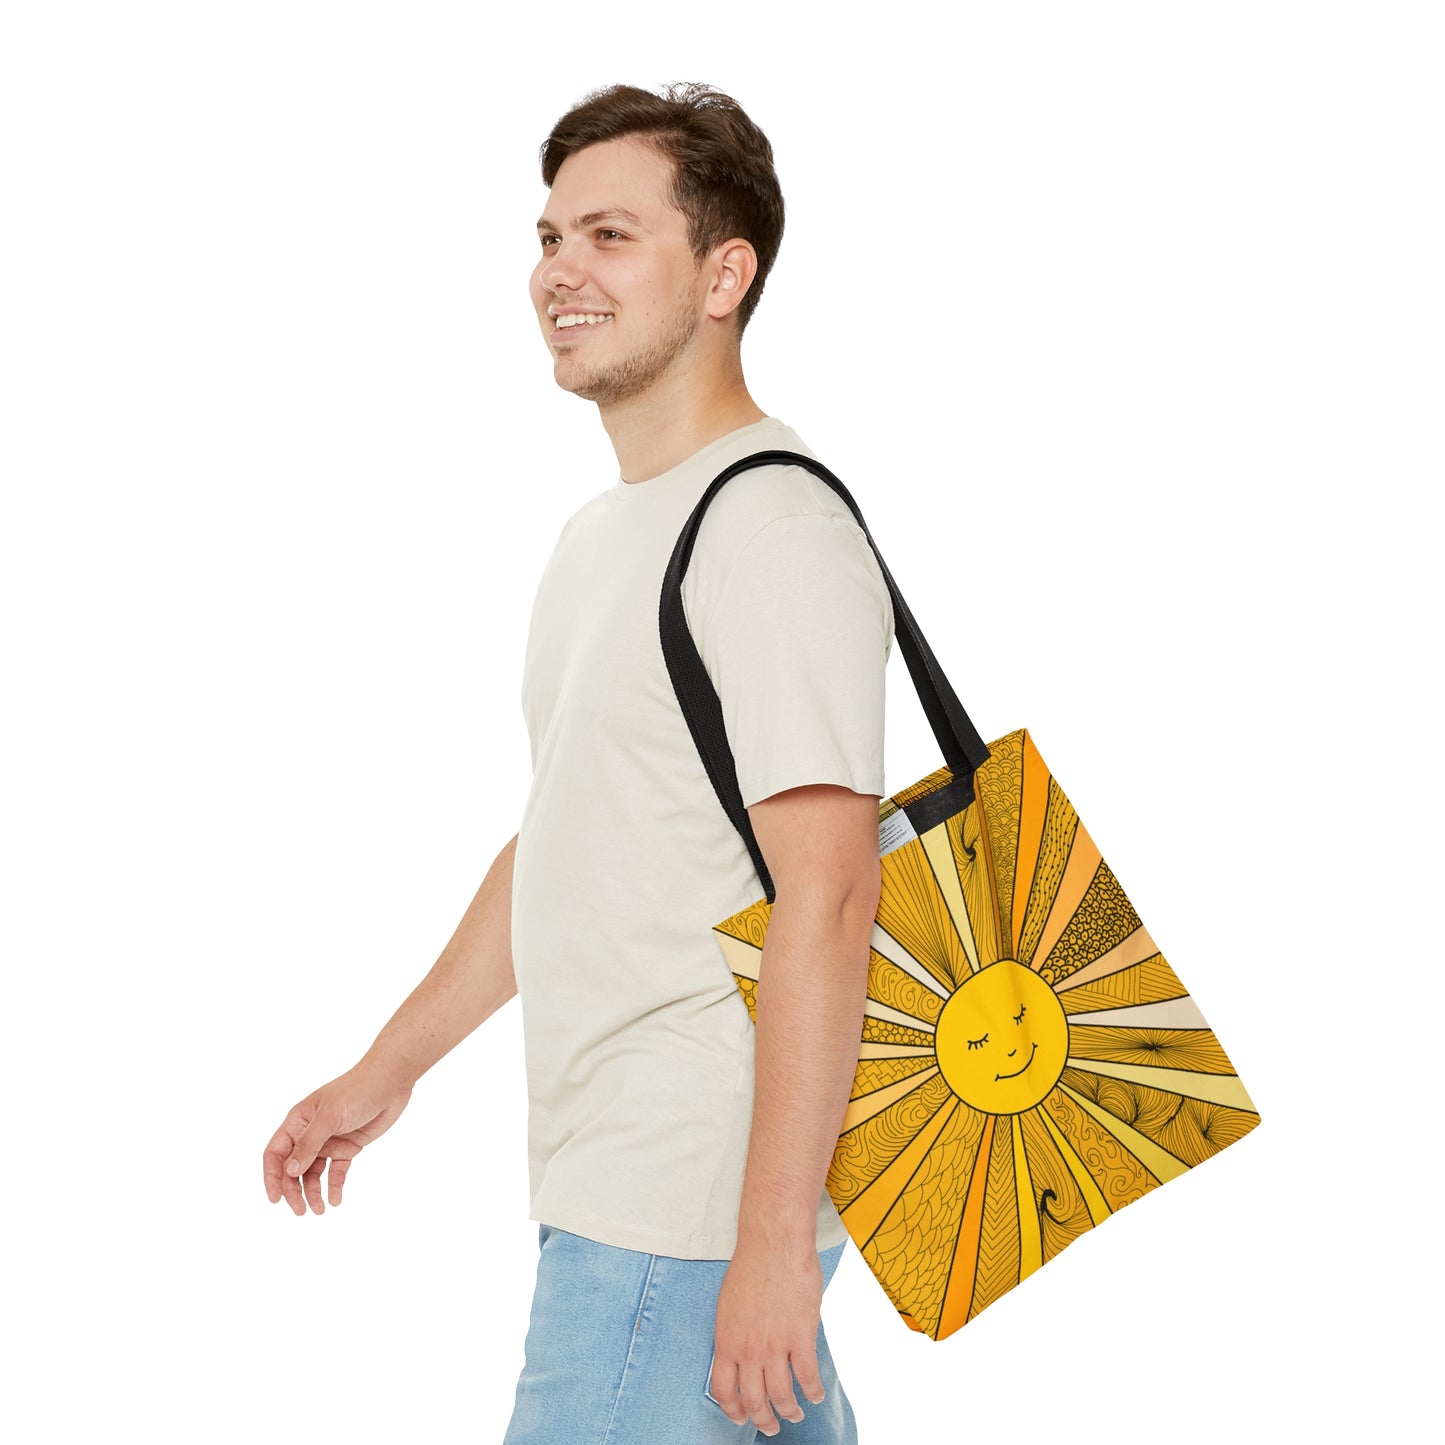 Sunny Days are Coming! Tote Bag